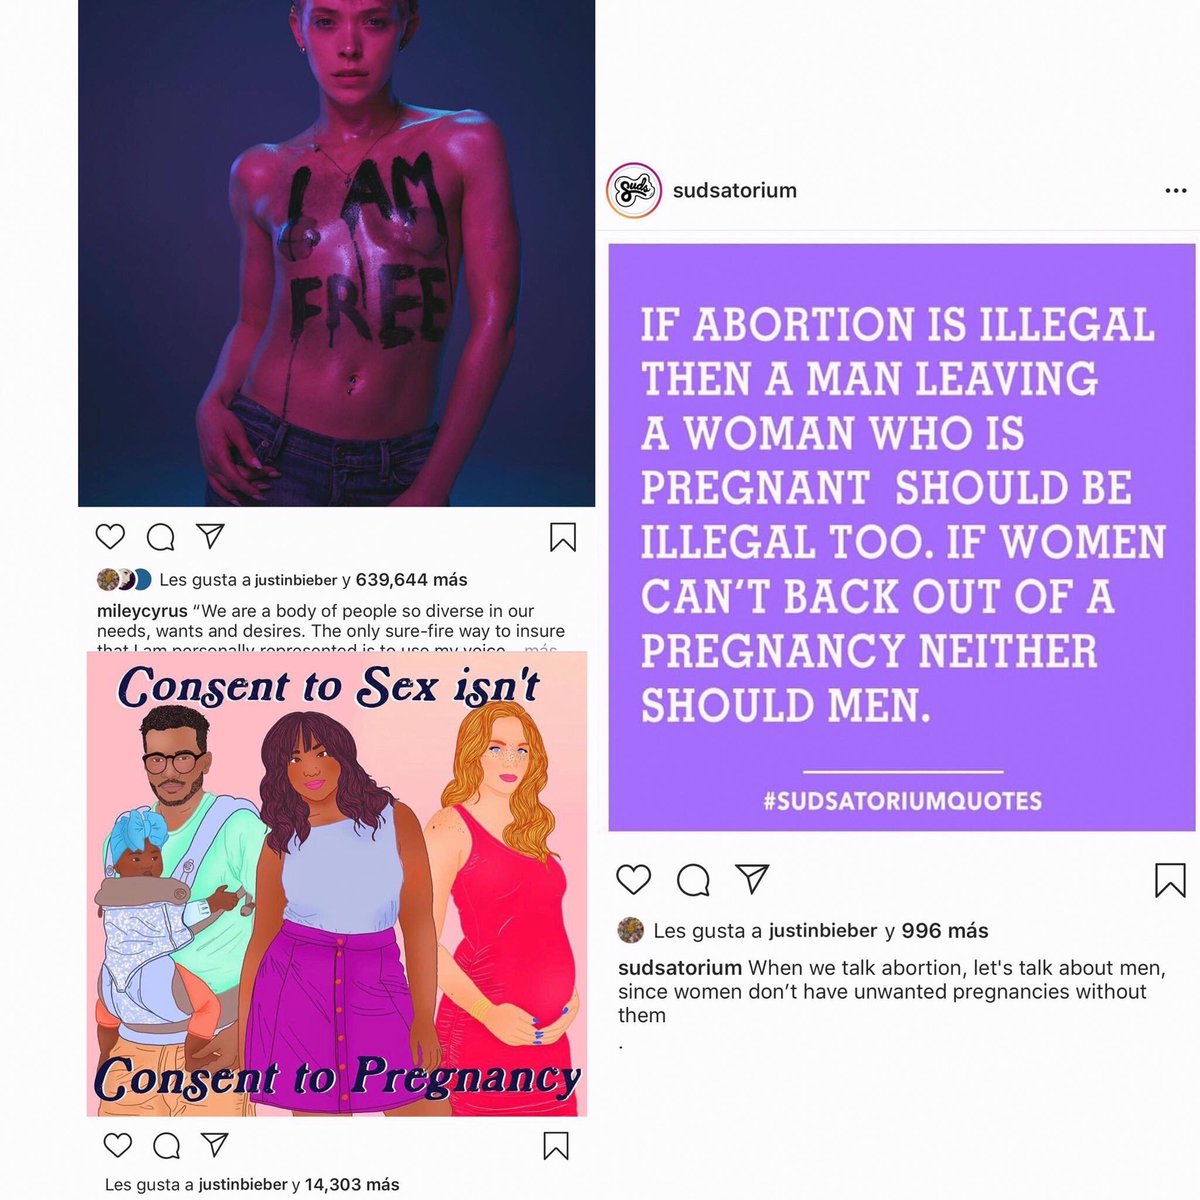 Justin expressed a pro-life stance before but that was due him almost being aborted, he changed his mind. He also punched a man abusing a woman, signed a petition to have more female producers and is a part of organization which brings awarness about women trafficking and r@pe.